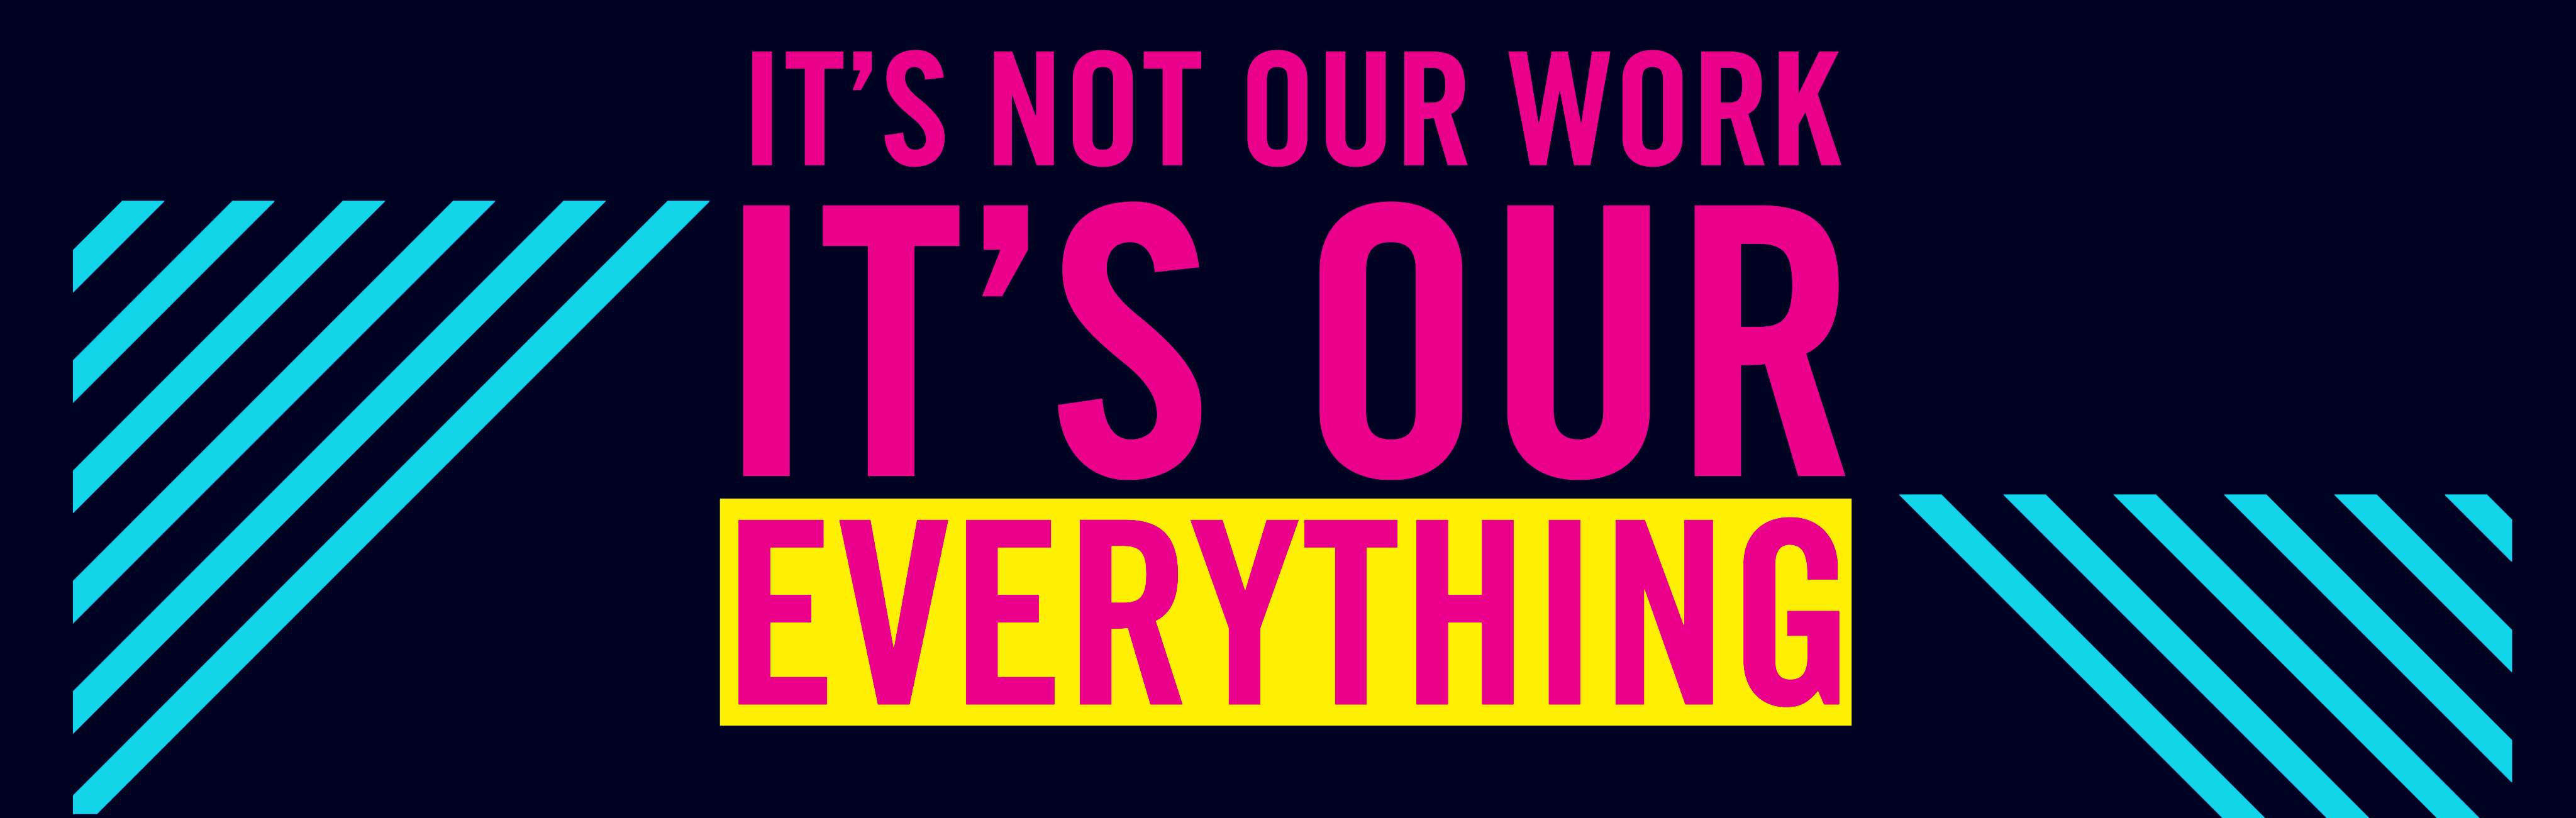 Its-not-our-work-its-our-everything